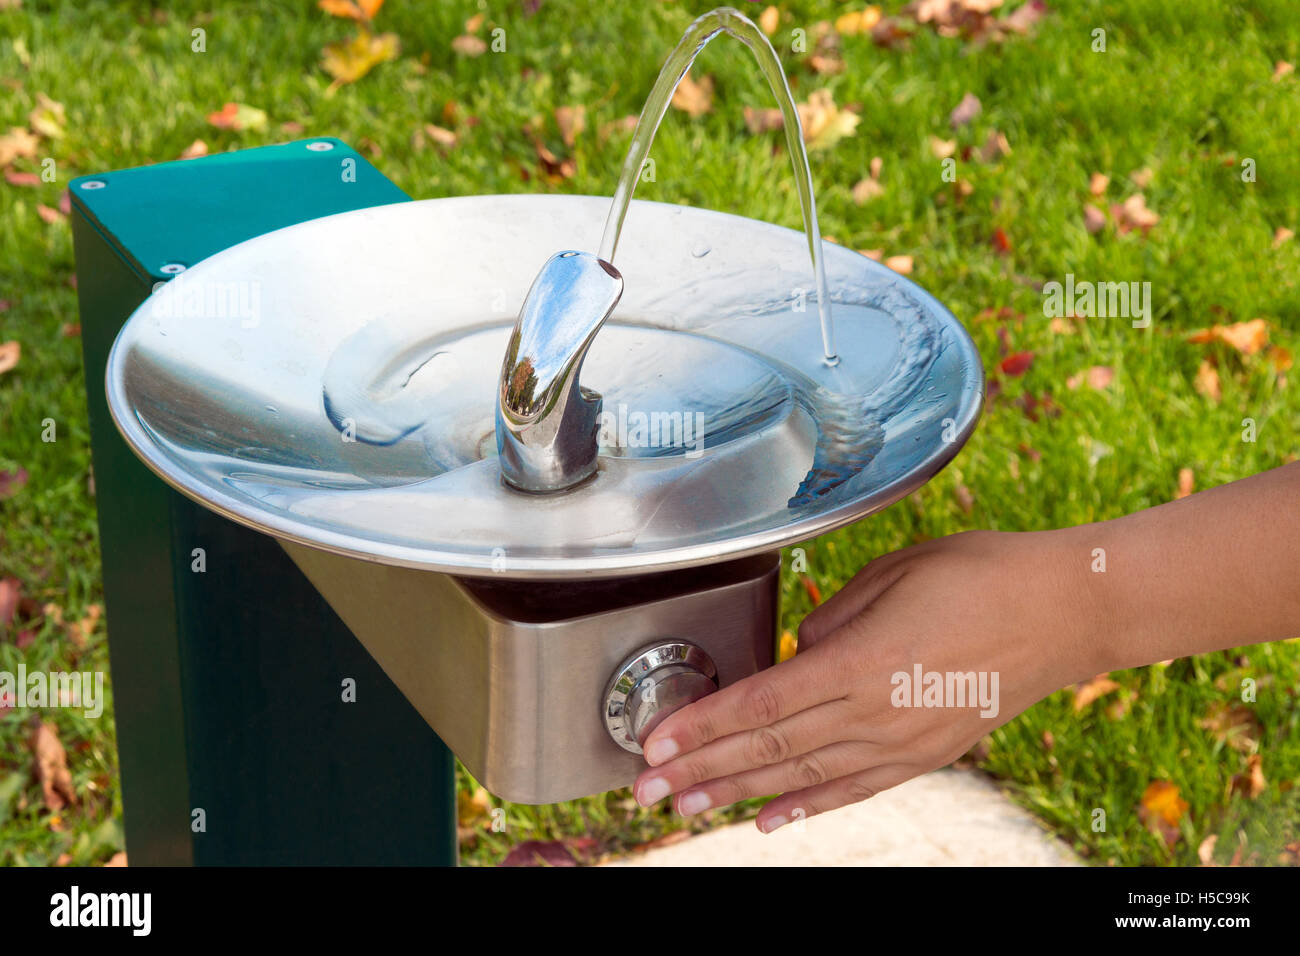 Hand pressing park fountain button, causing water to flow for a cool drink Stock Photo